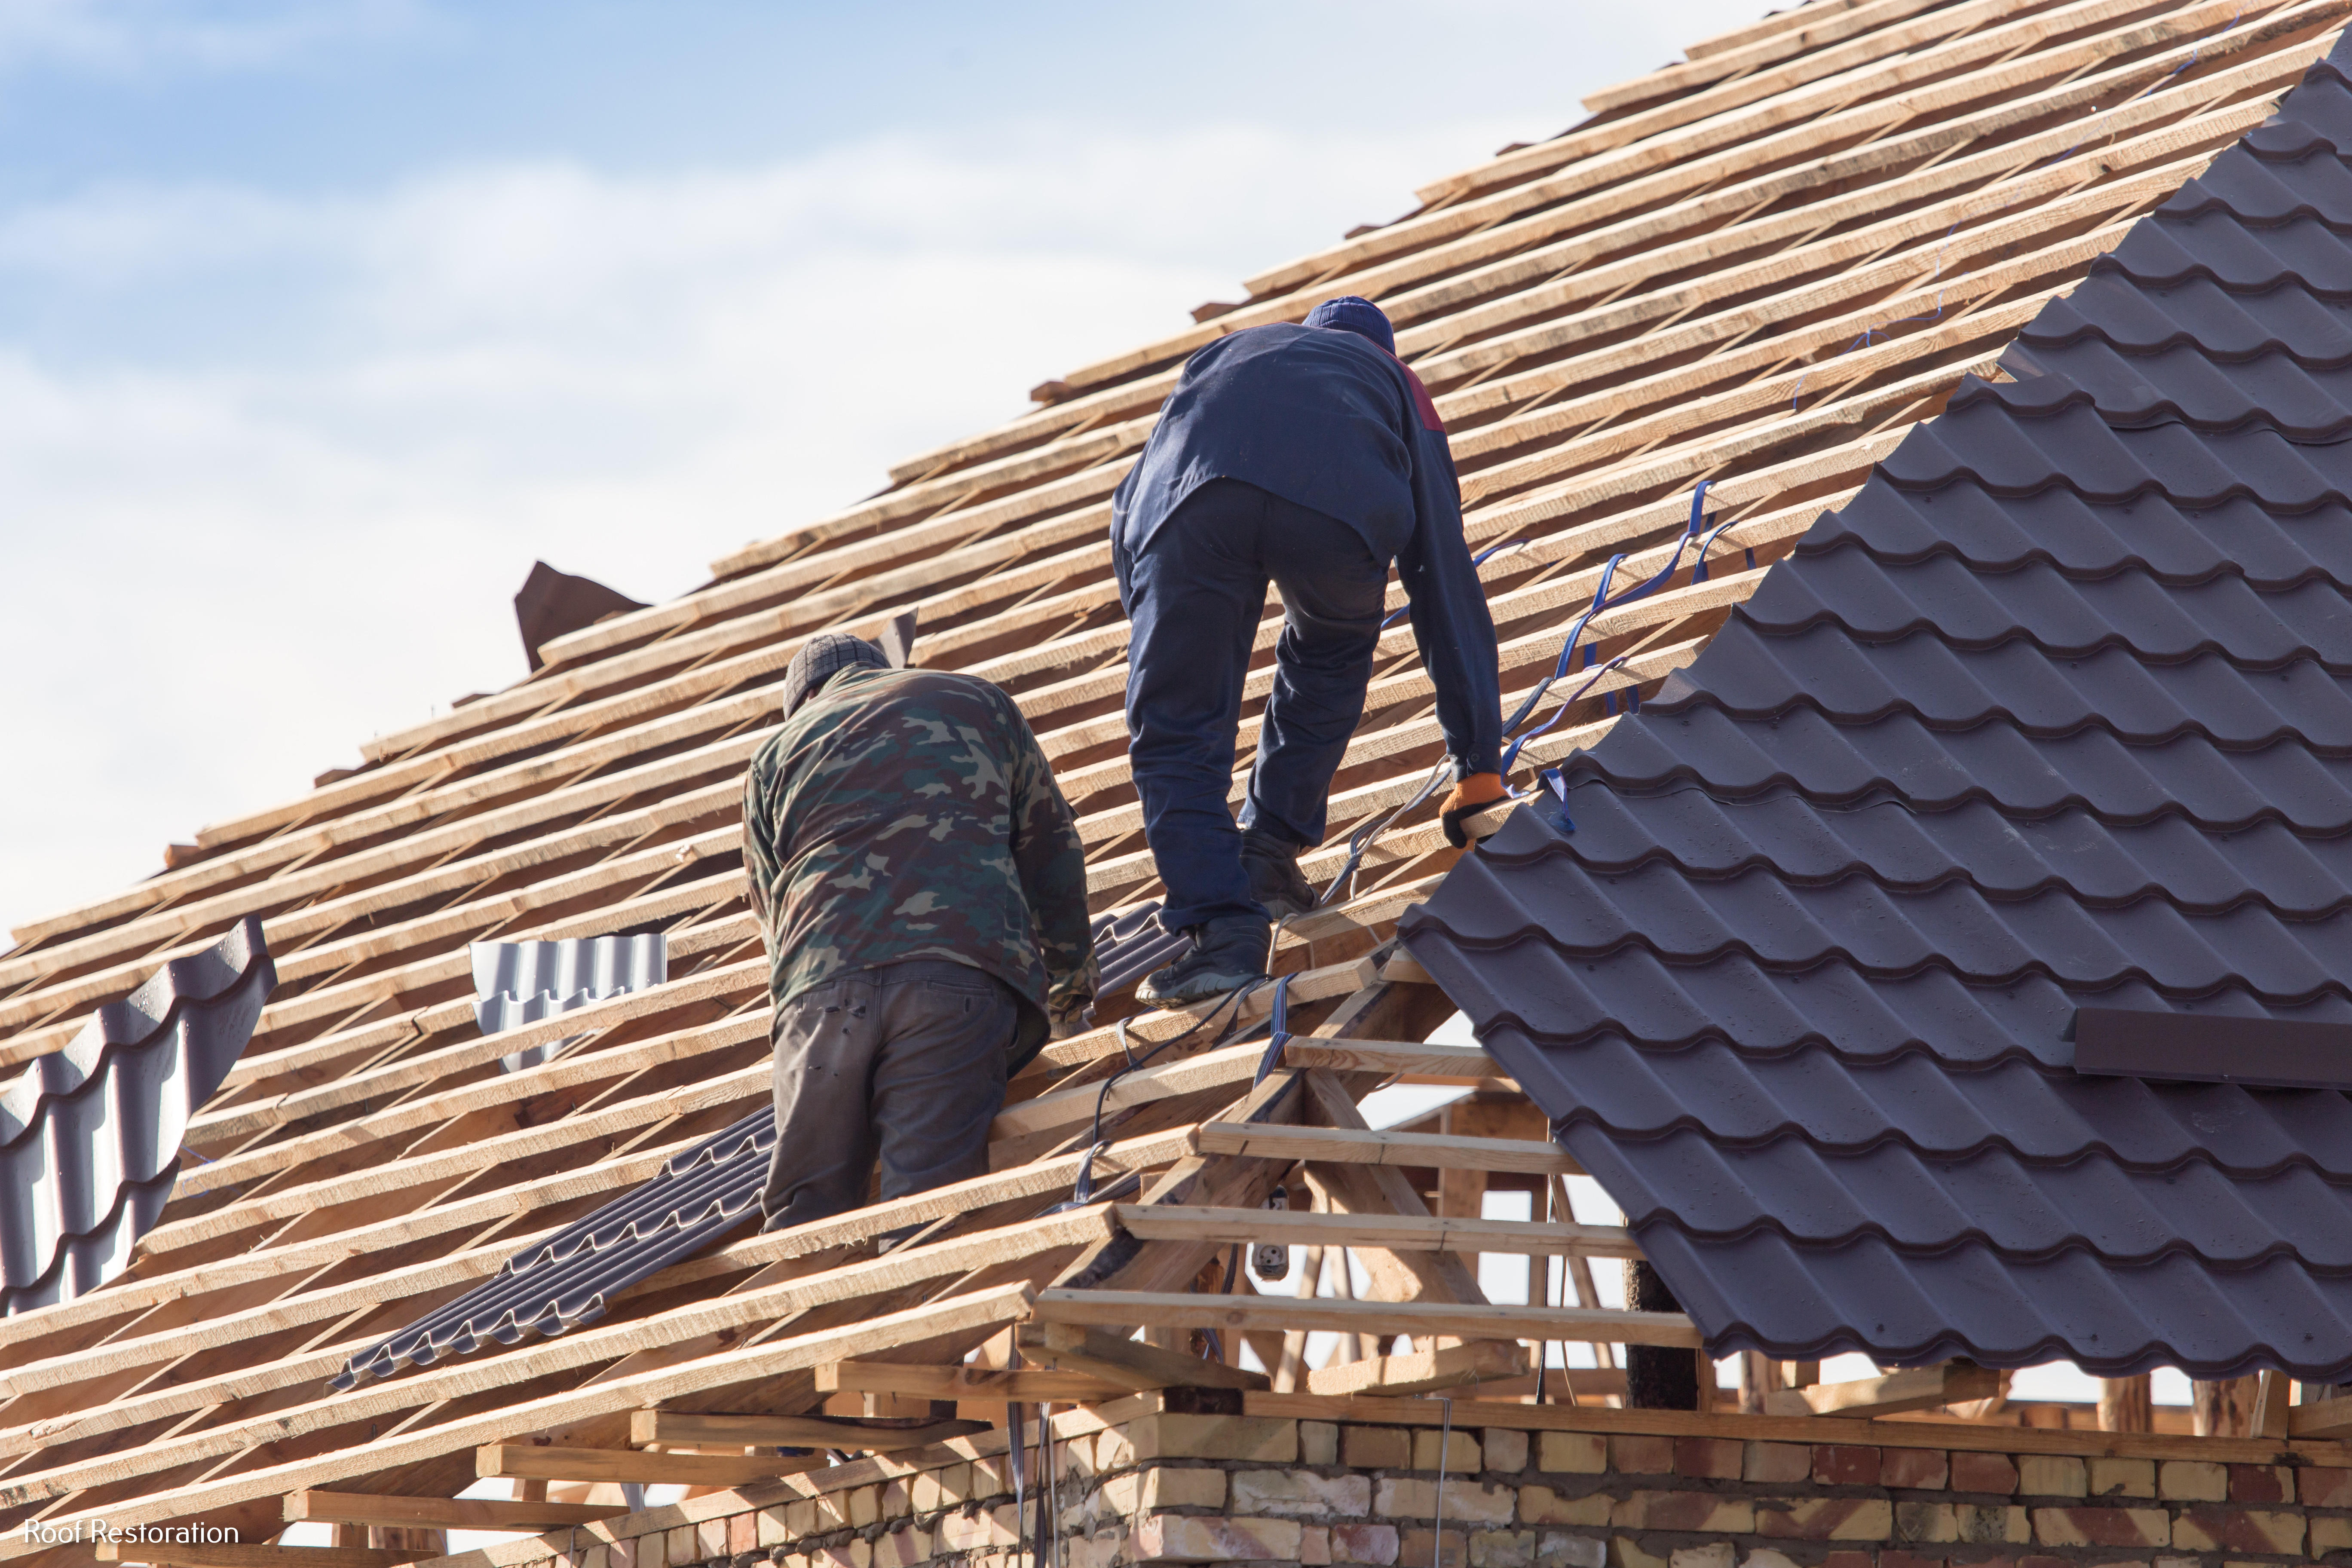 High Caliber Roofs - Boiling Springs Roofing Contractor Outlines the traits of a professional roofing company